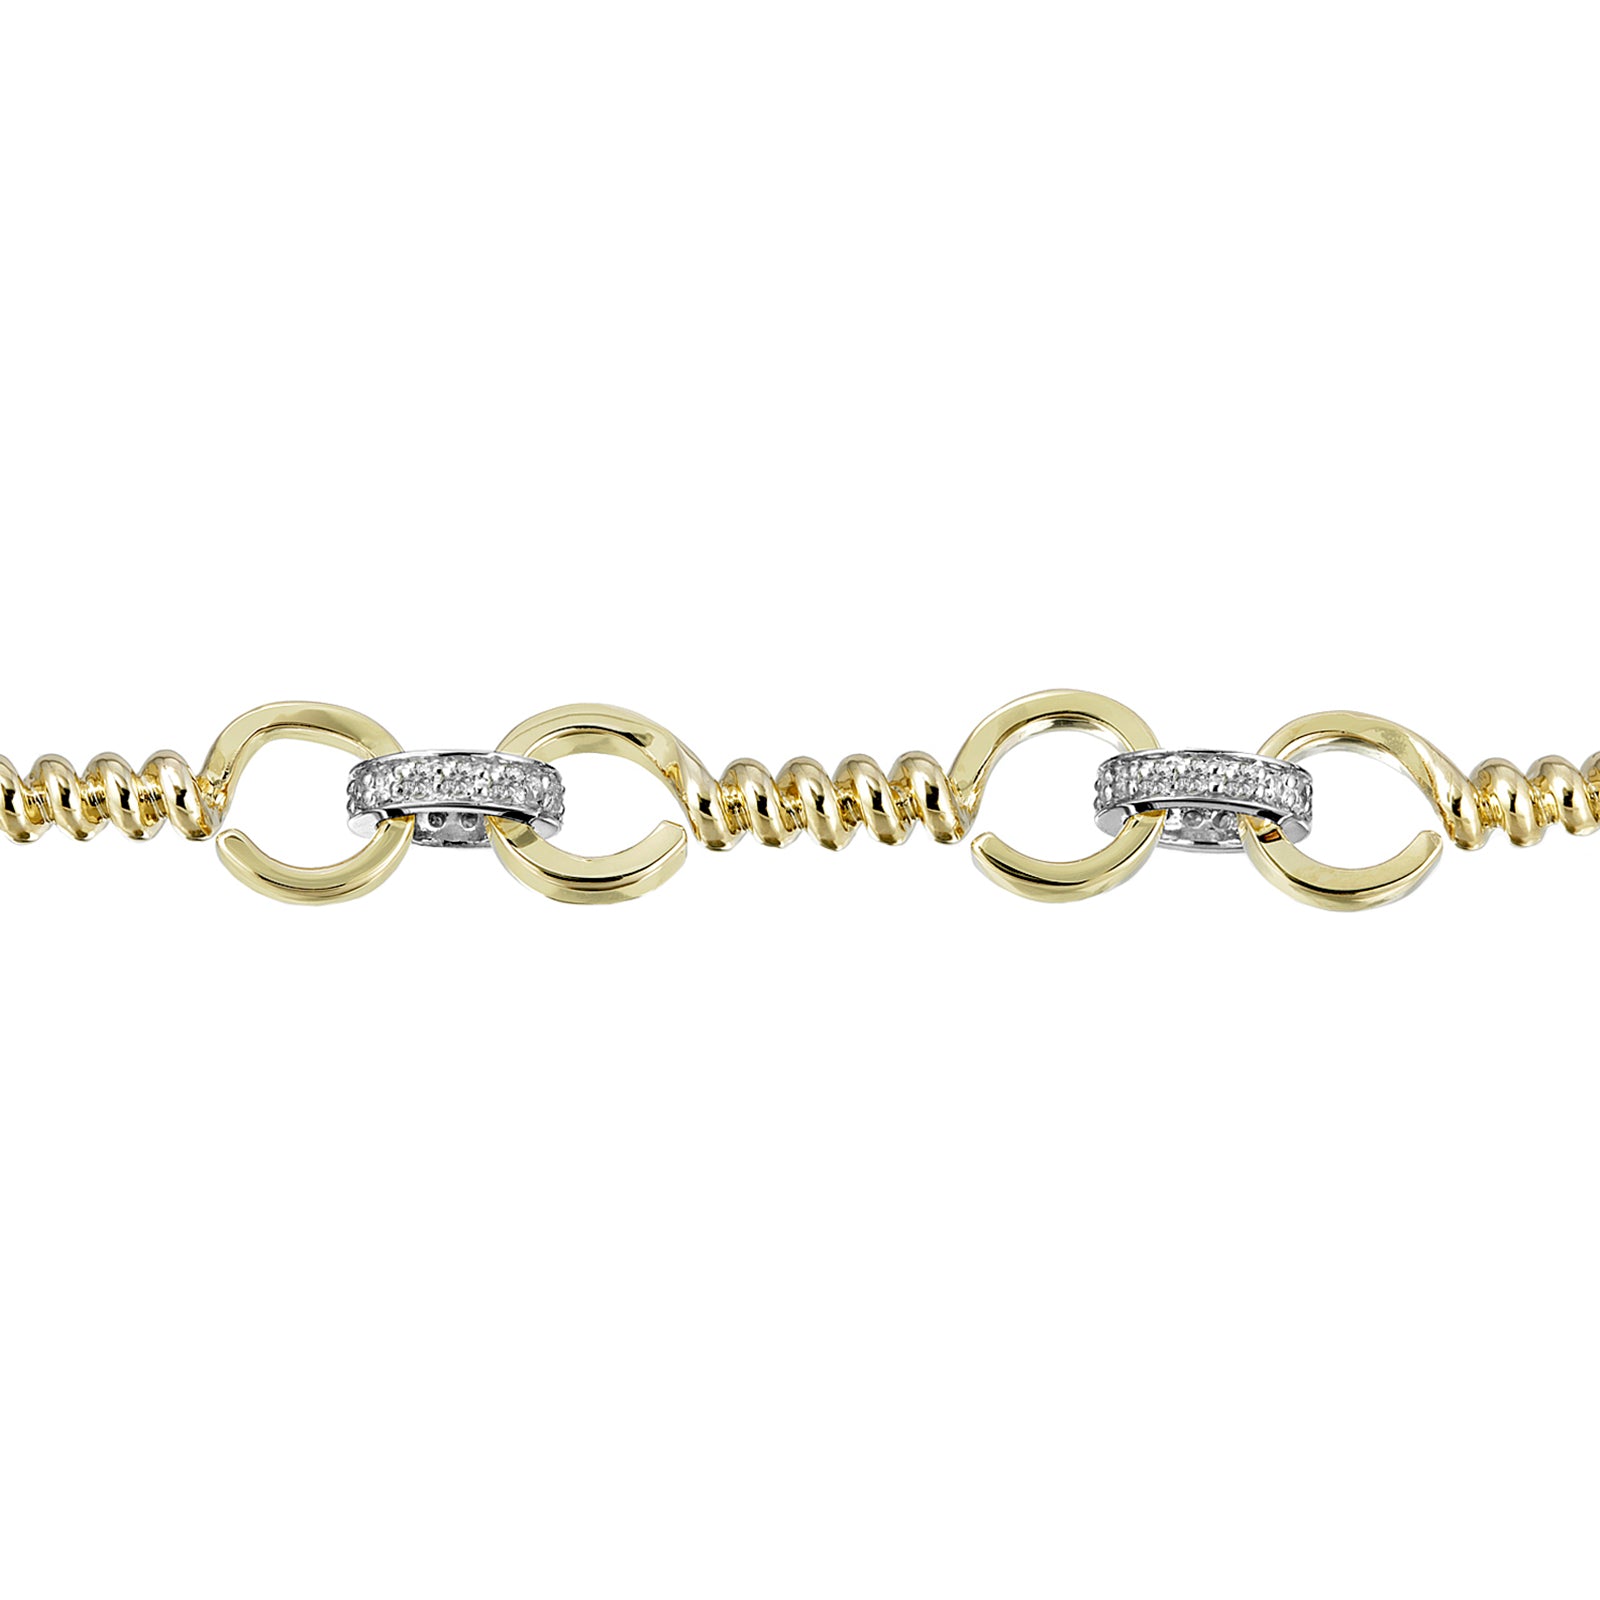 14K YELLOW GOLD TWISTED OVAL LINK AND POLISHED BAR BRACELET